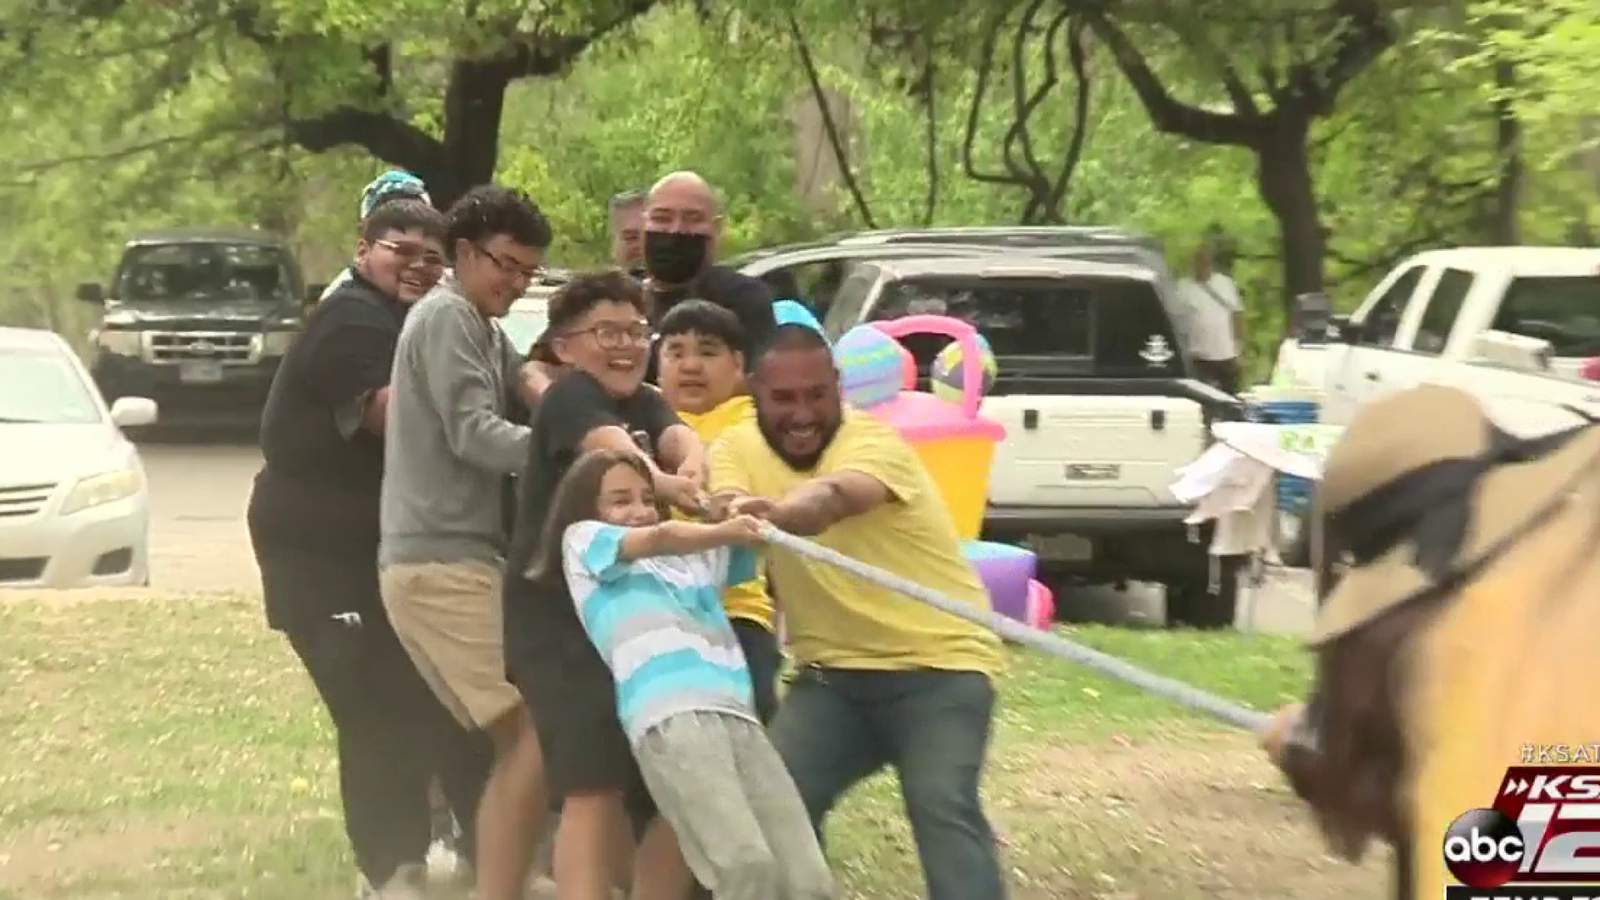 San Antonio families return to parks for Easter traditions